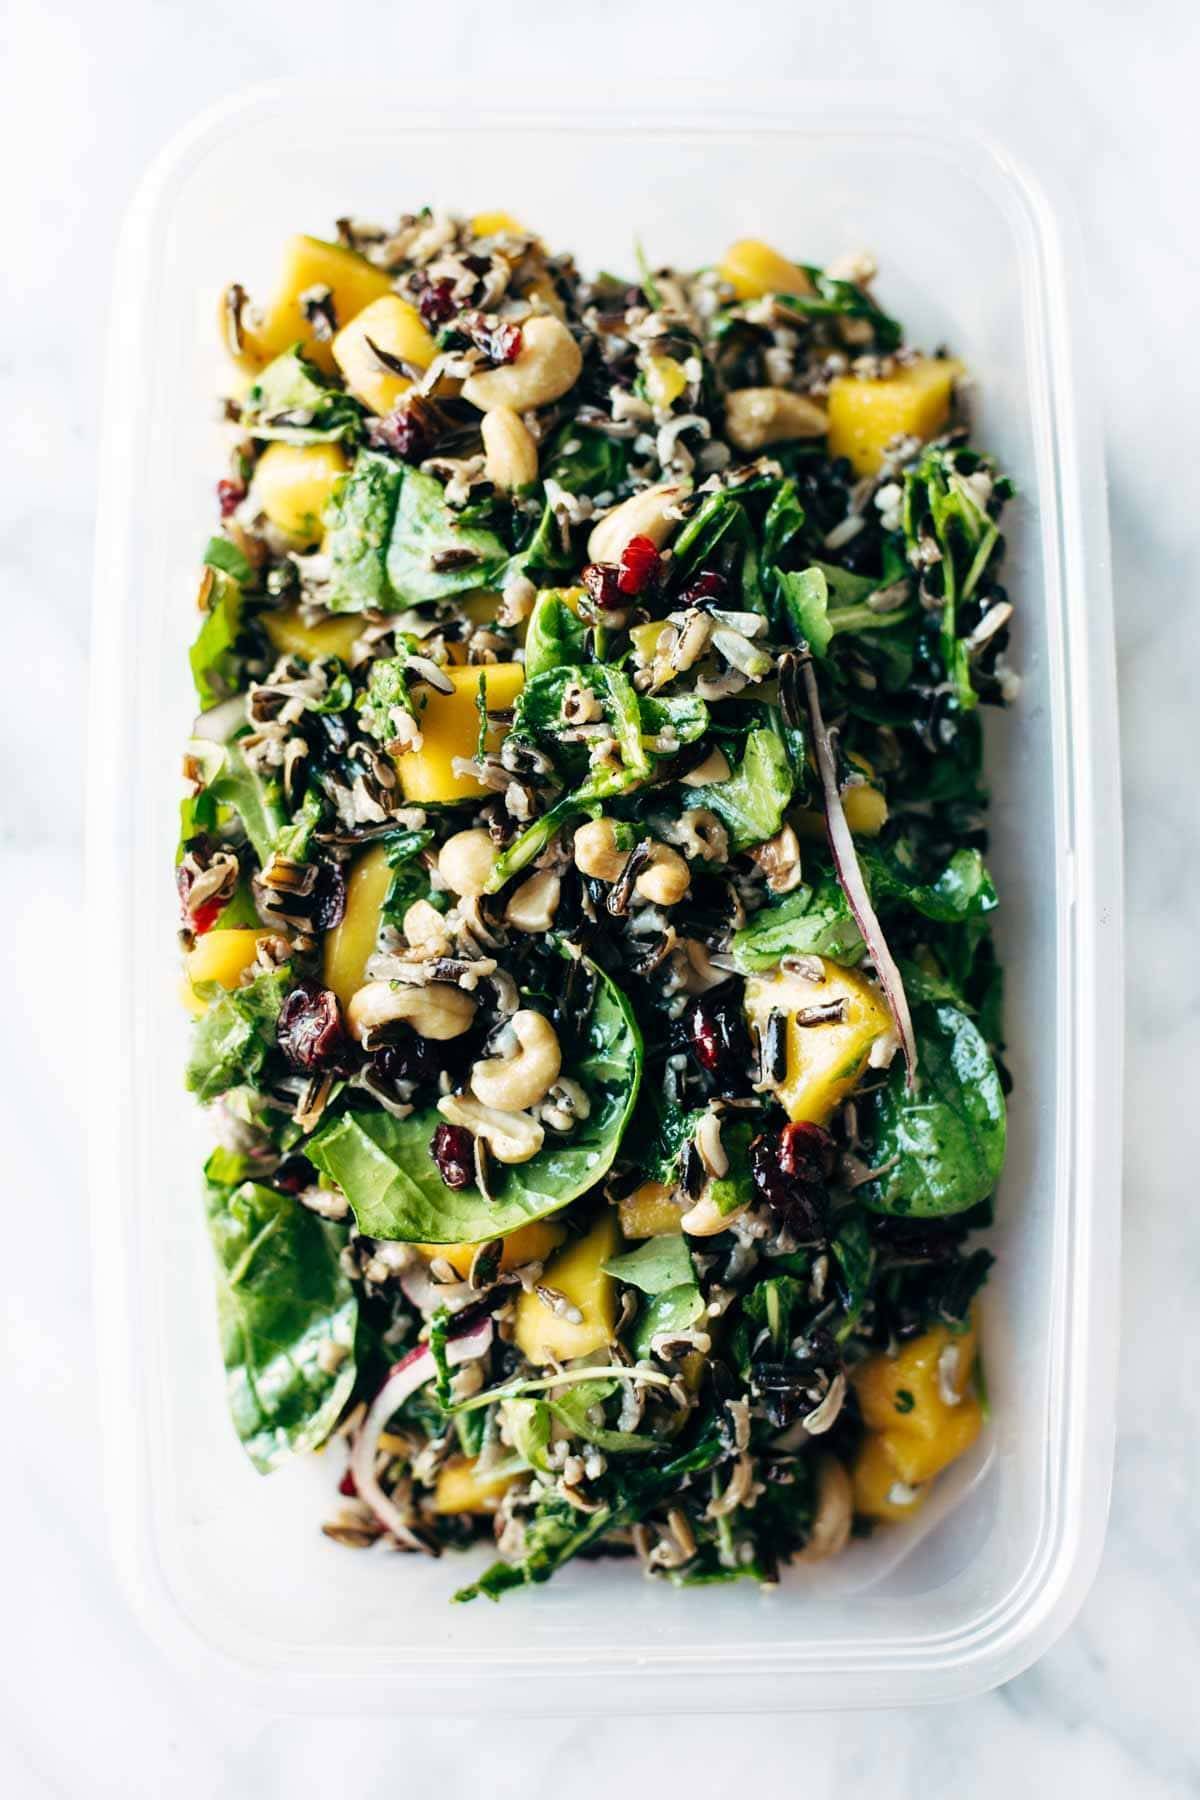 Easy Thanksgiving Salad - arugula, wild rice, cashews, dried cranberries, red onions, and a lemon dressing that shakes up easily in a jar. | pinchofyum.com